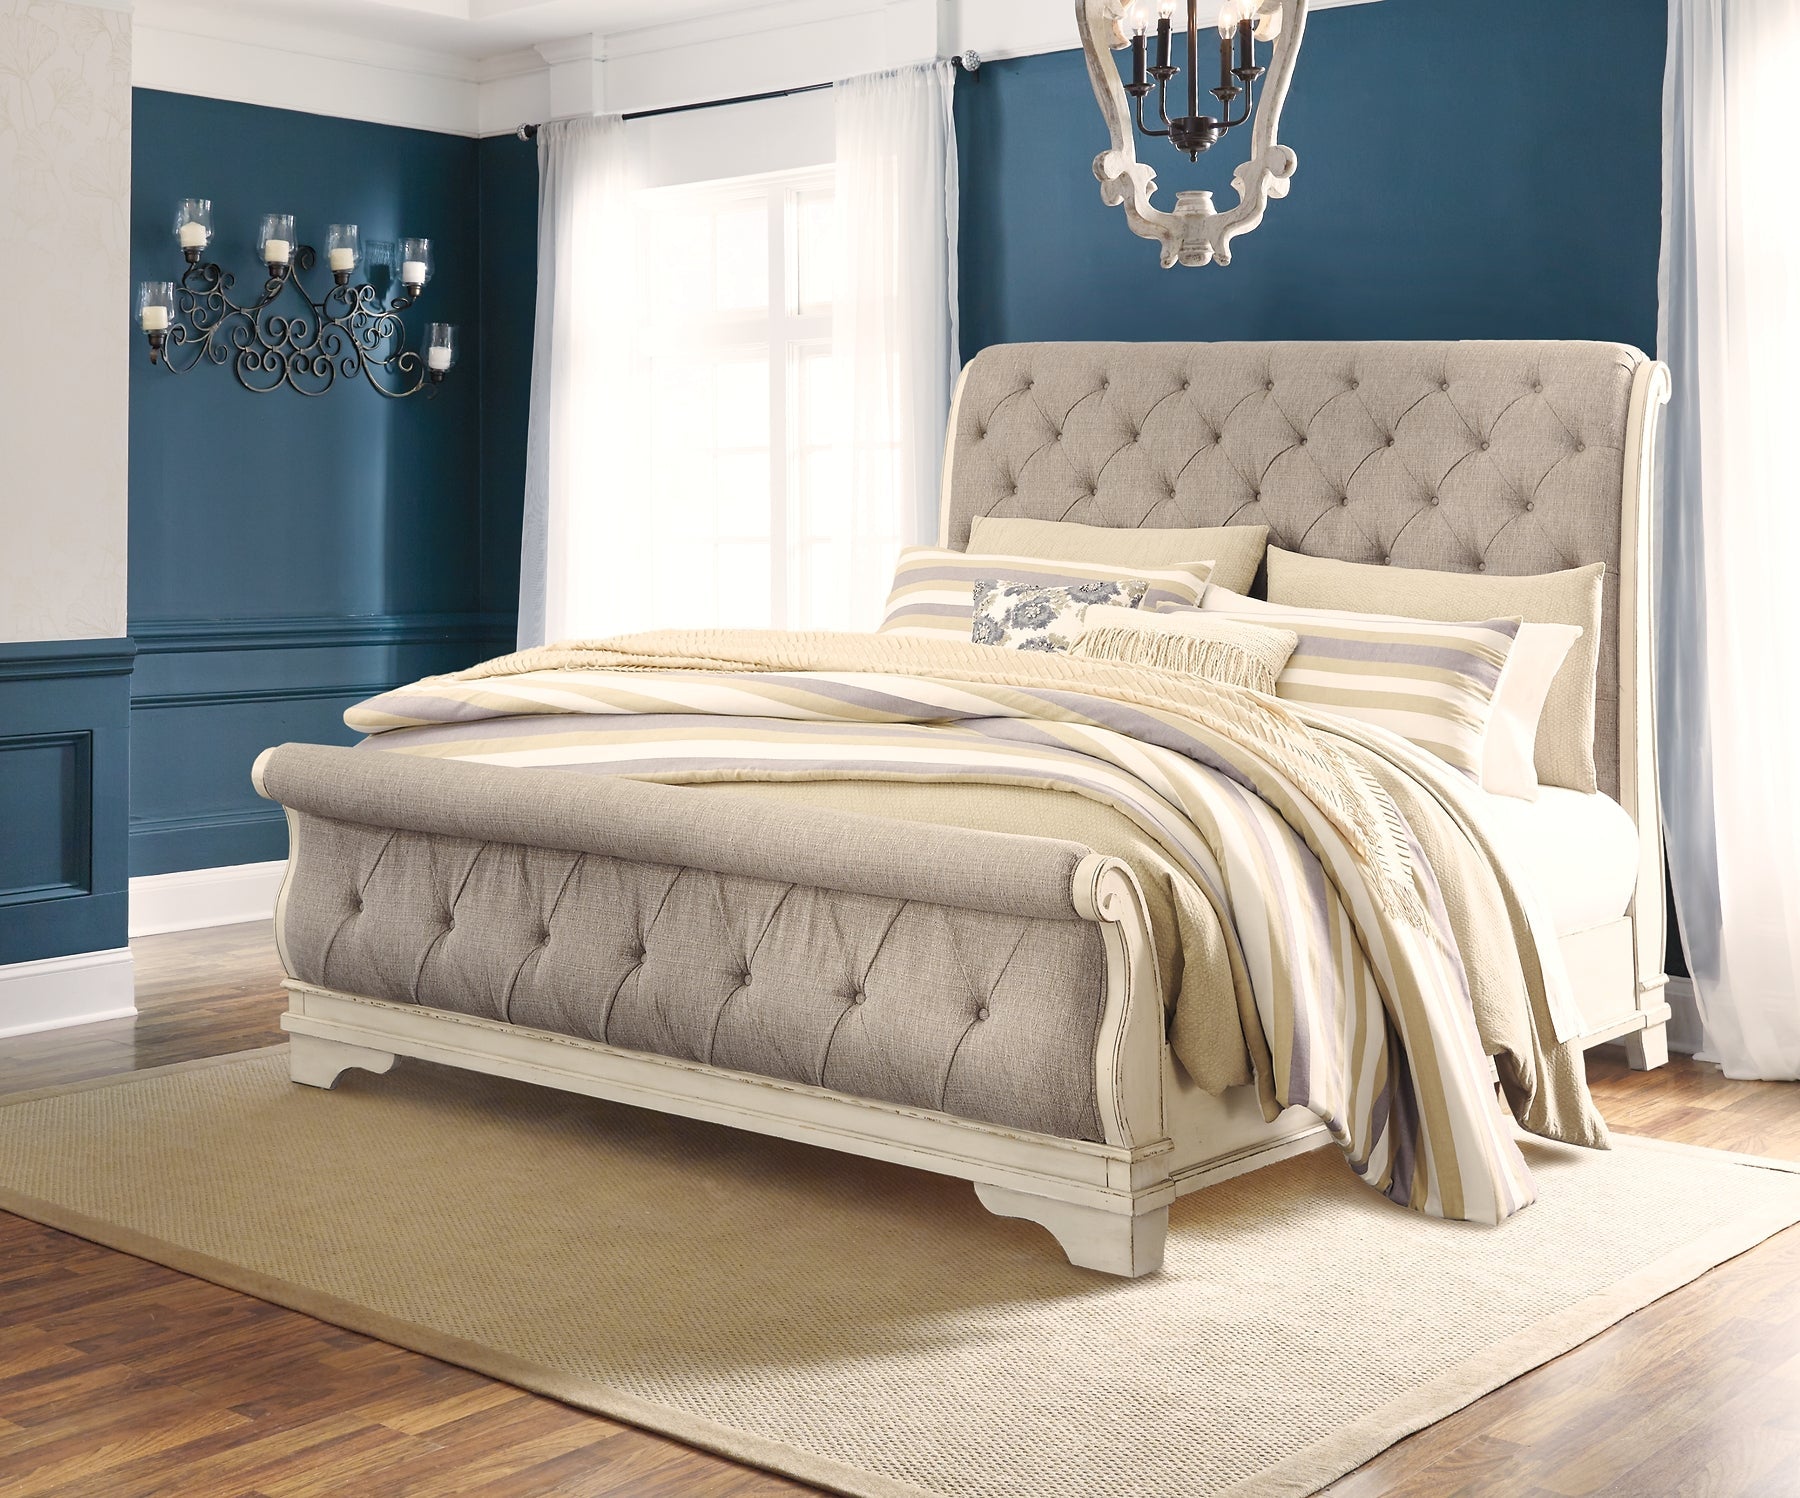 Realyn Queen Sleigh Bed with Dresser at Walker Mattress and Furniture Locations in Cedar Park and Belton TX.